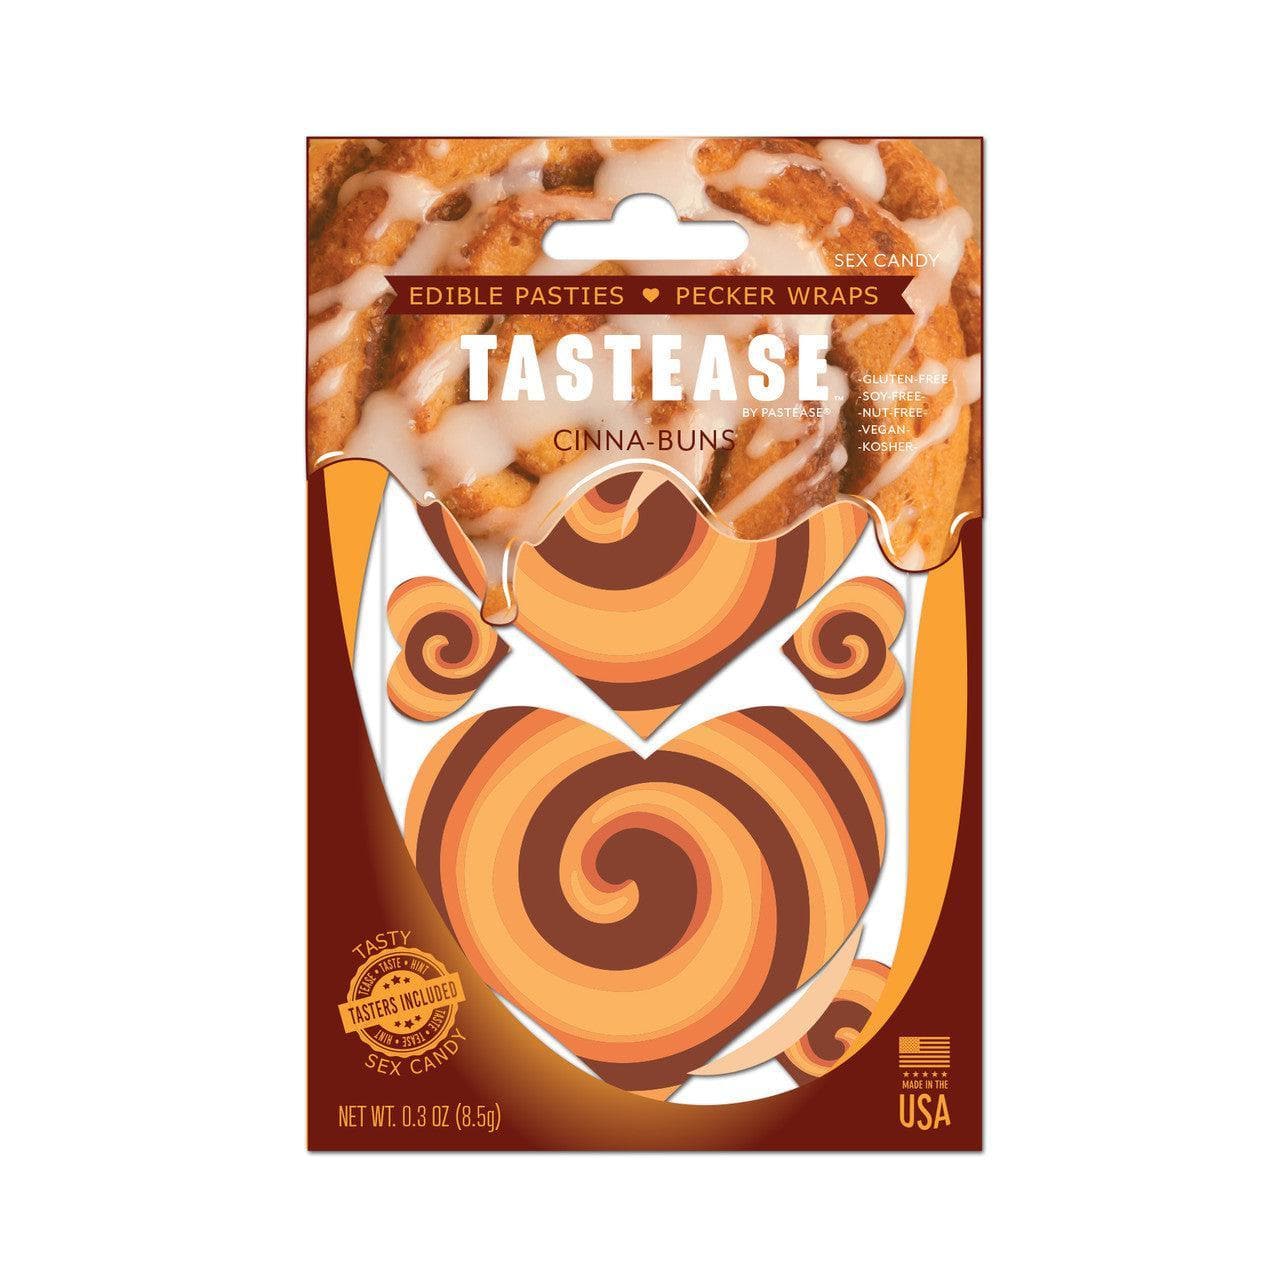 Tastease by Pastease Cinna-Buns Cinnamon Roll Candy Edible Pasties & Pecker Wraps - Romantic Blessings